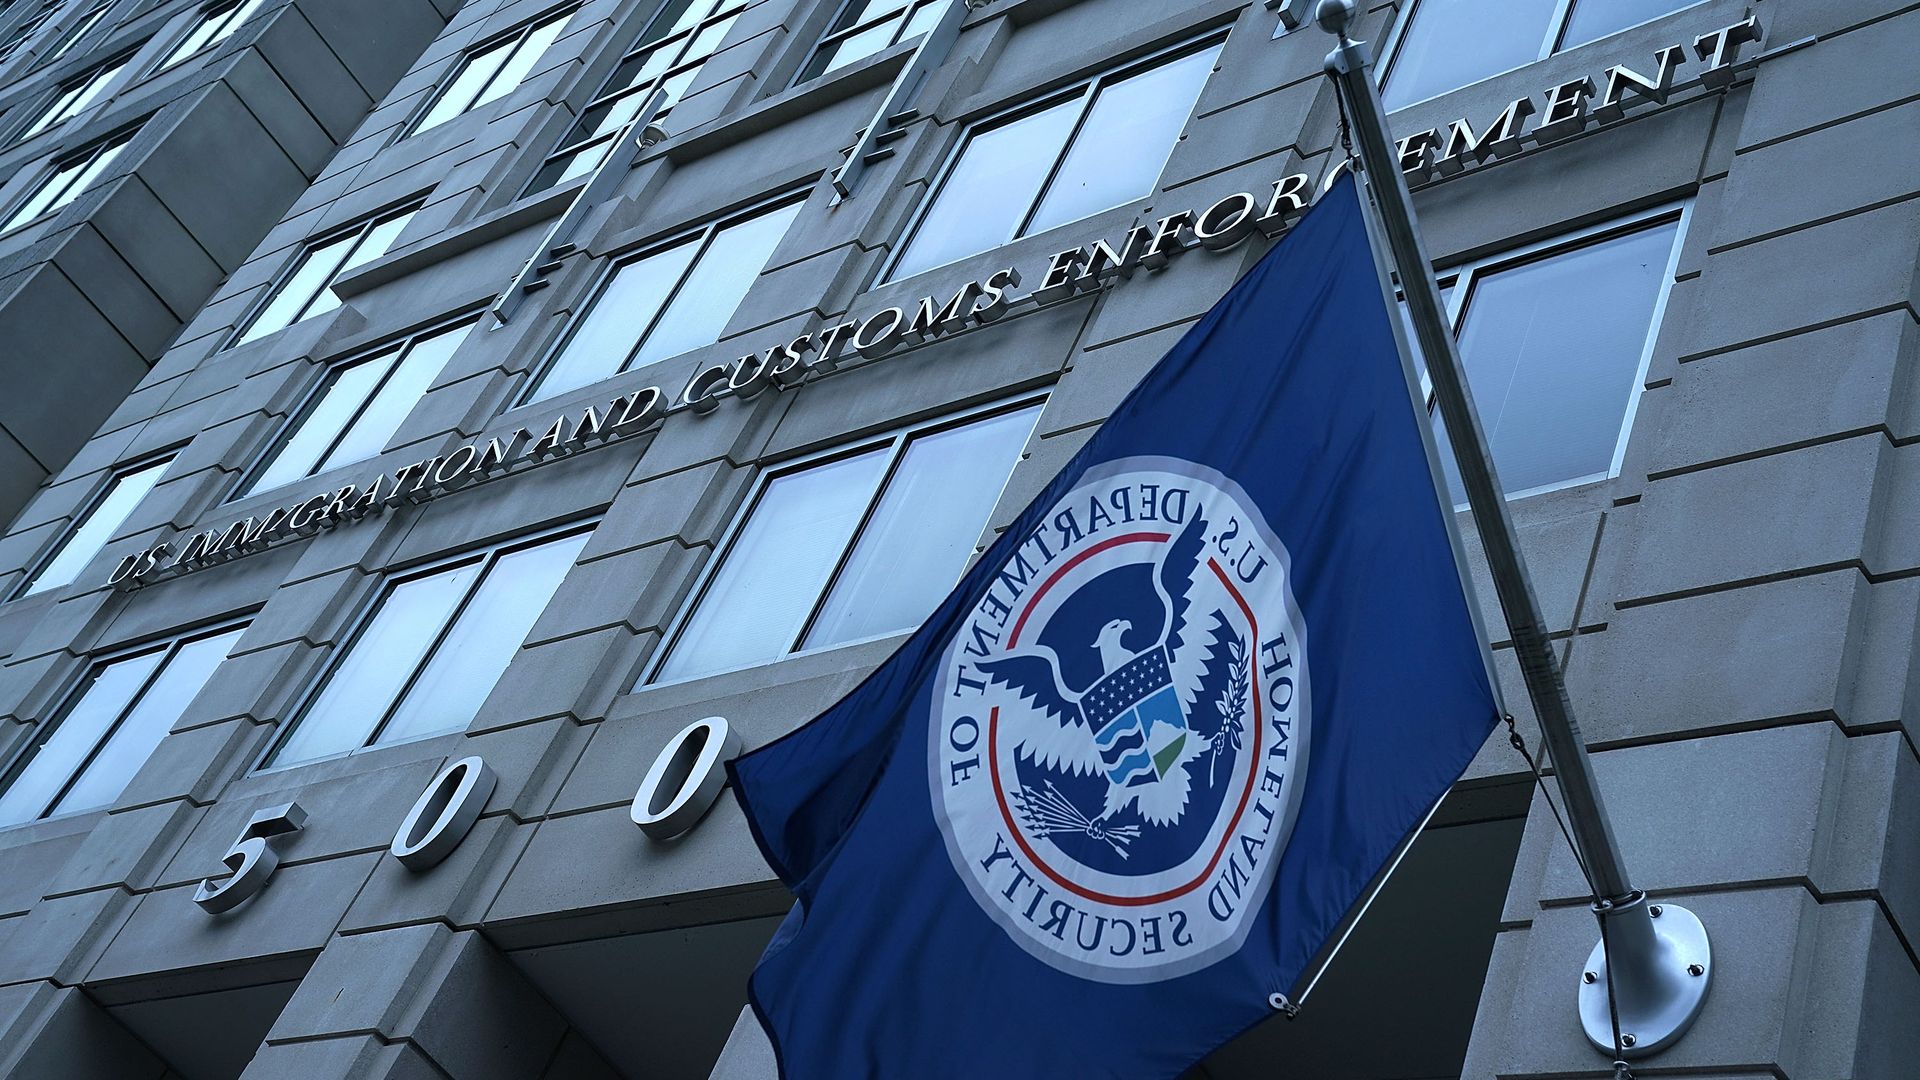 An exterior view of U.S. Immigration and Customs Enforcement (ICE) agency headquarters